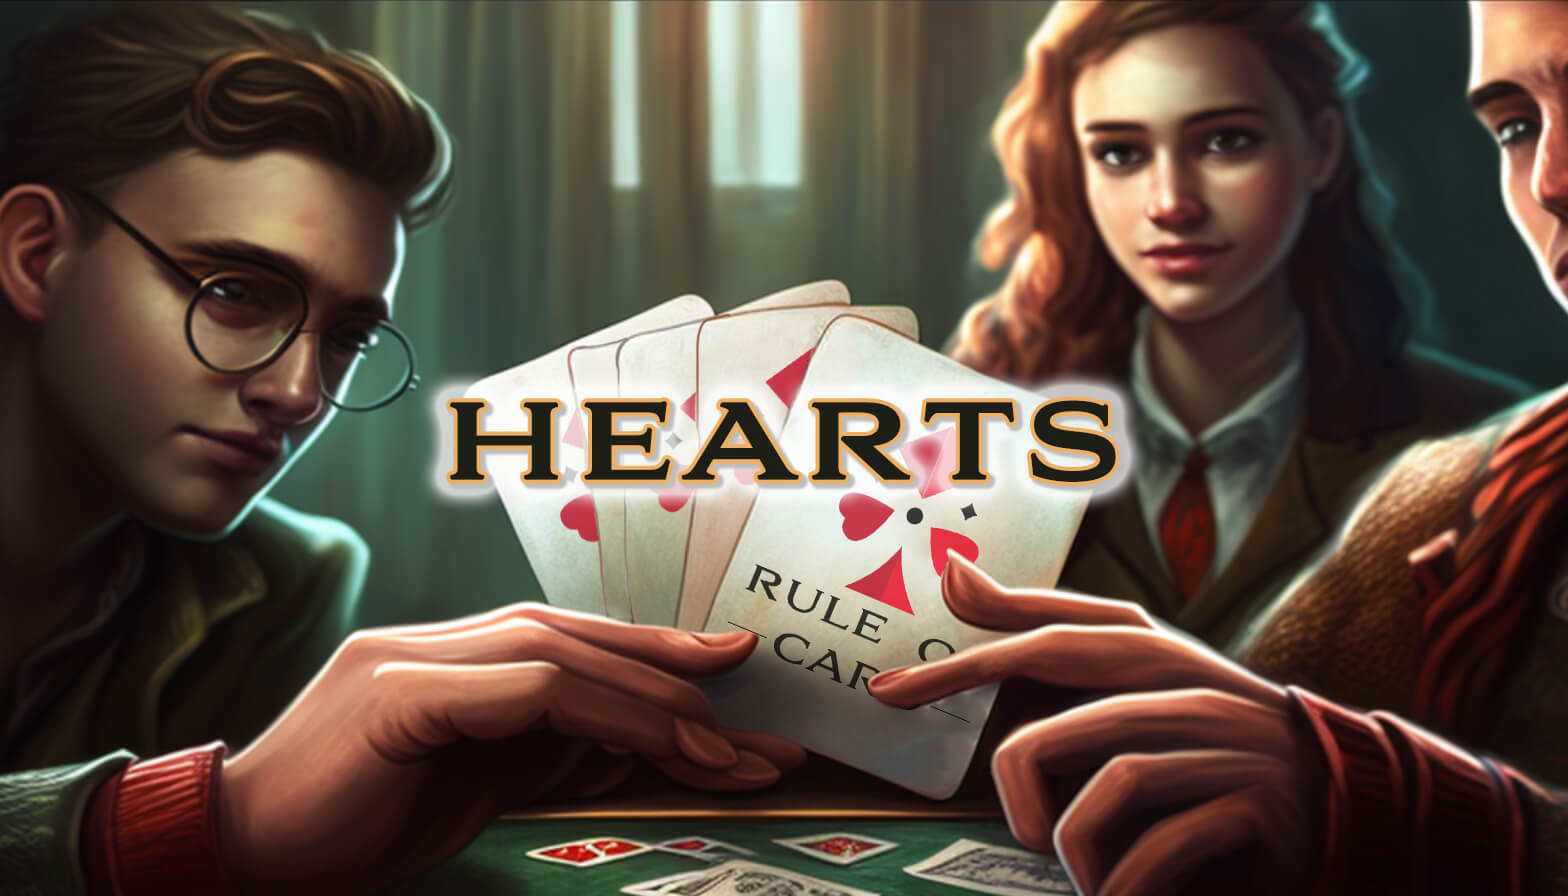 Playing the card game Hearts